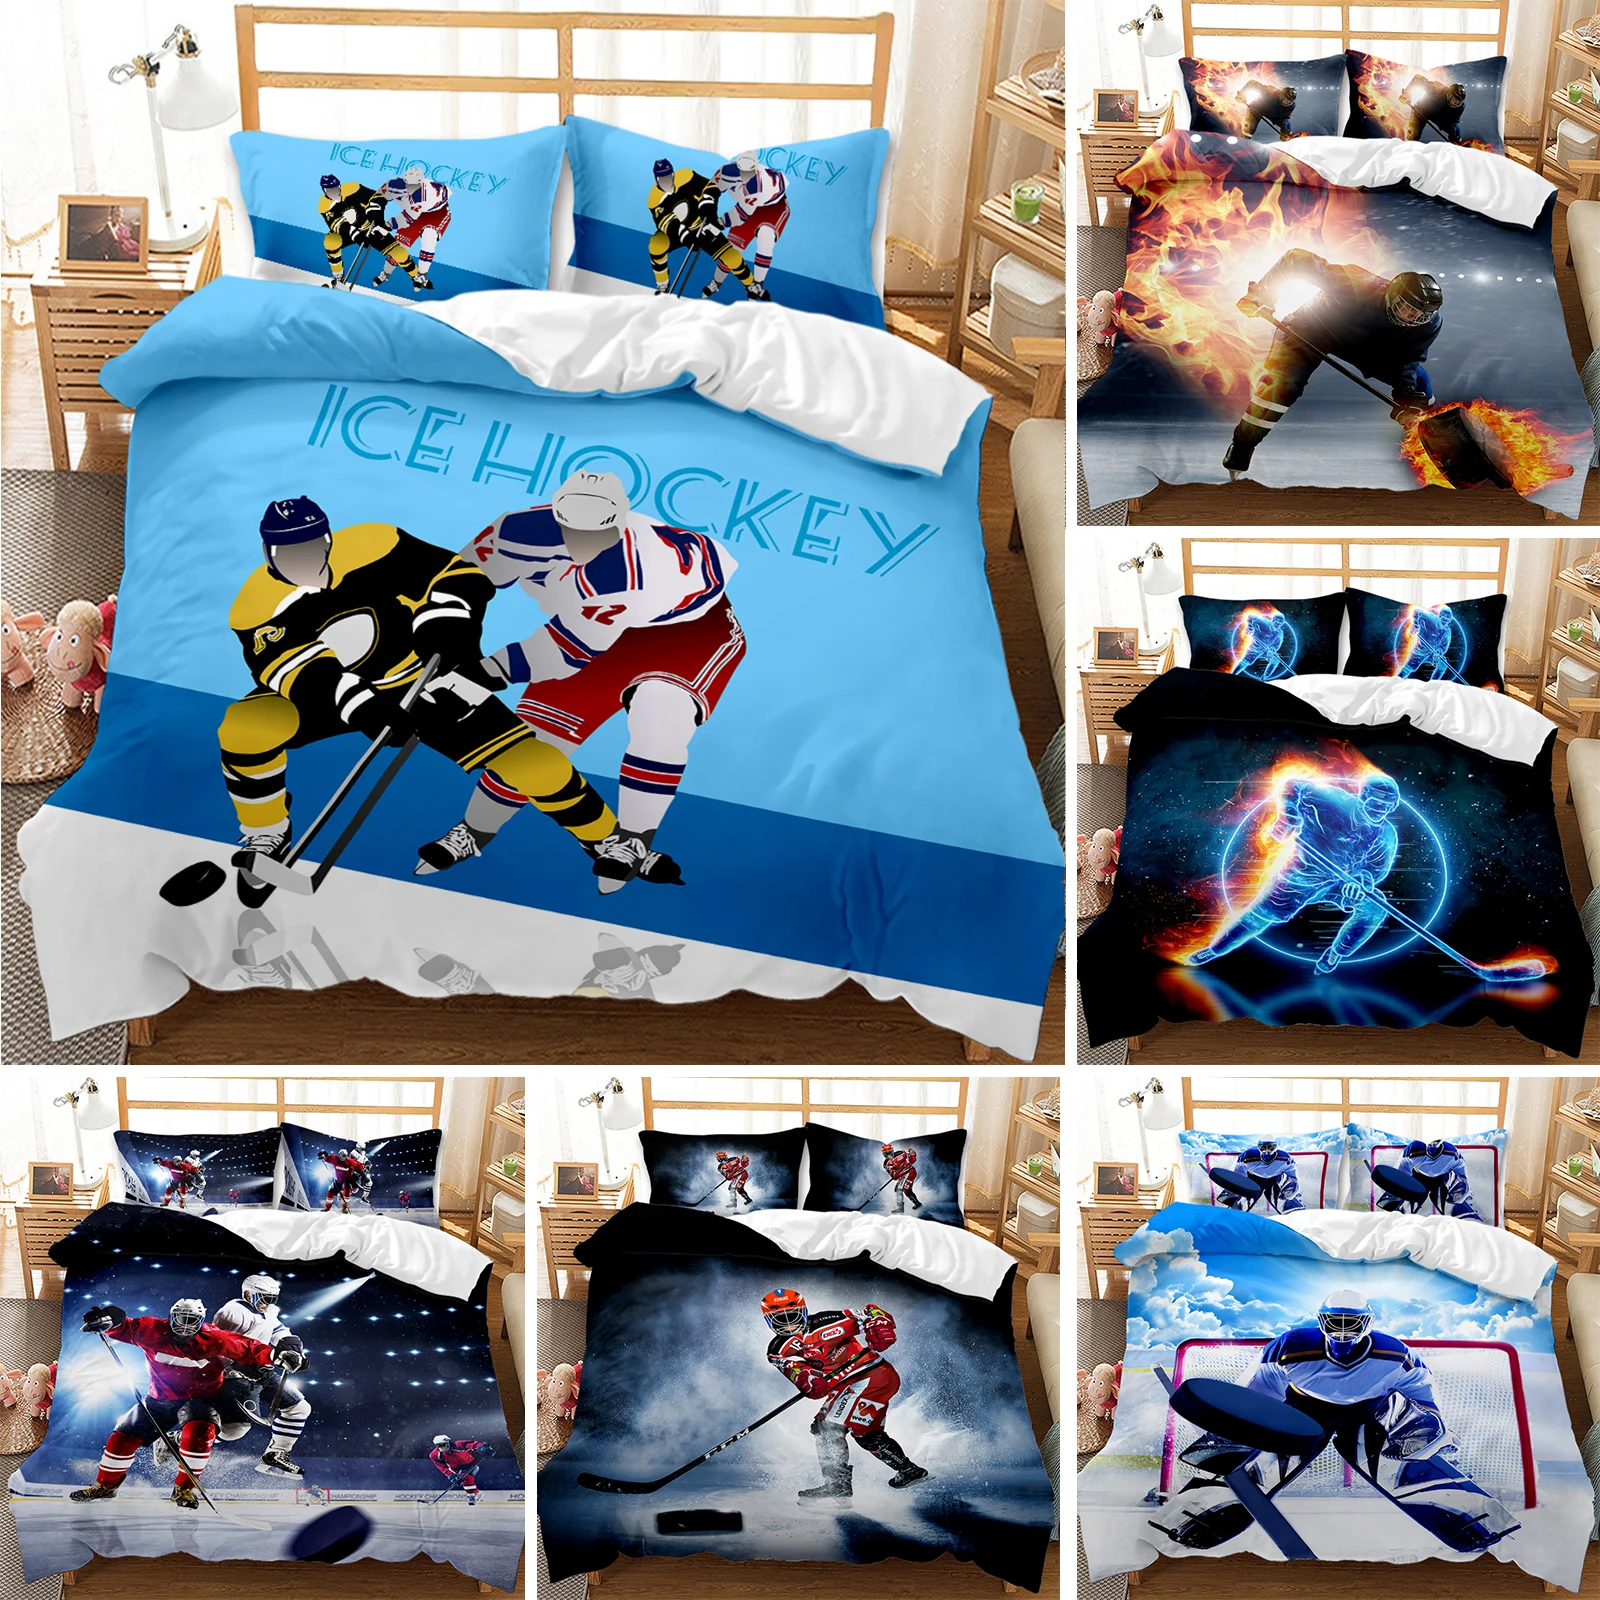 

Ice Hockey Duvet Cover Twin Hockey Sport Player Bedding Set Winter Extreme Sport Game Comforter Cover Soft Polyester Quitl Cover